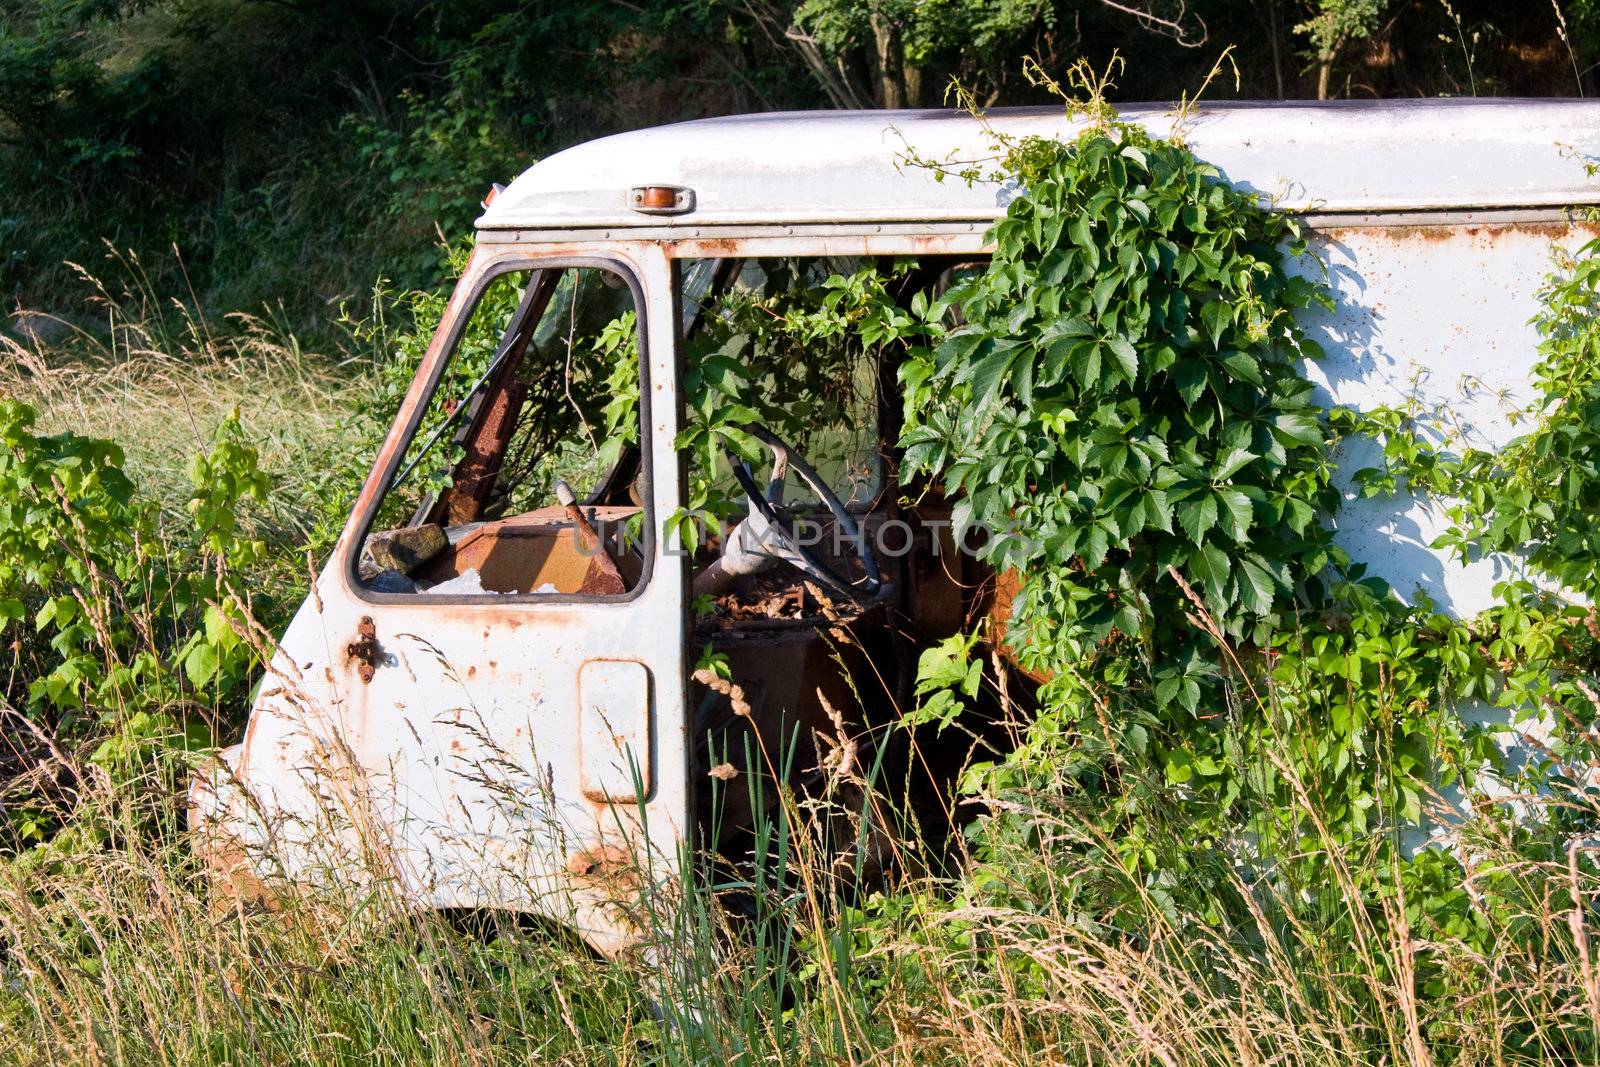 Close up of the cab of a rusty van left in deep grass in a wooden thicket